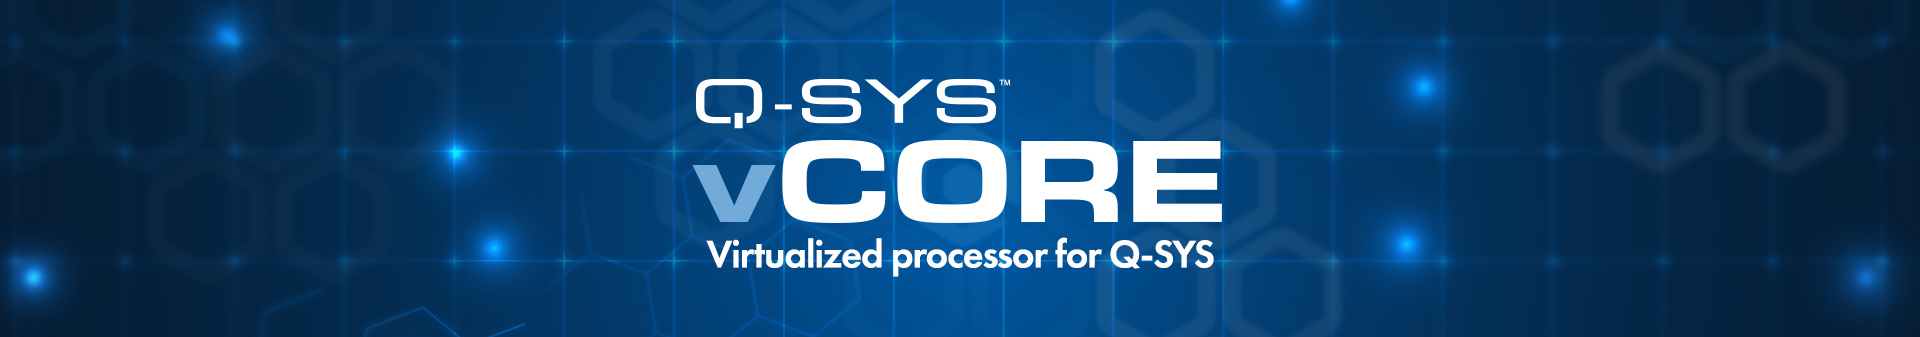 Image text: Q-SYS vCore, virtualize processor for Q-SYS